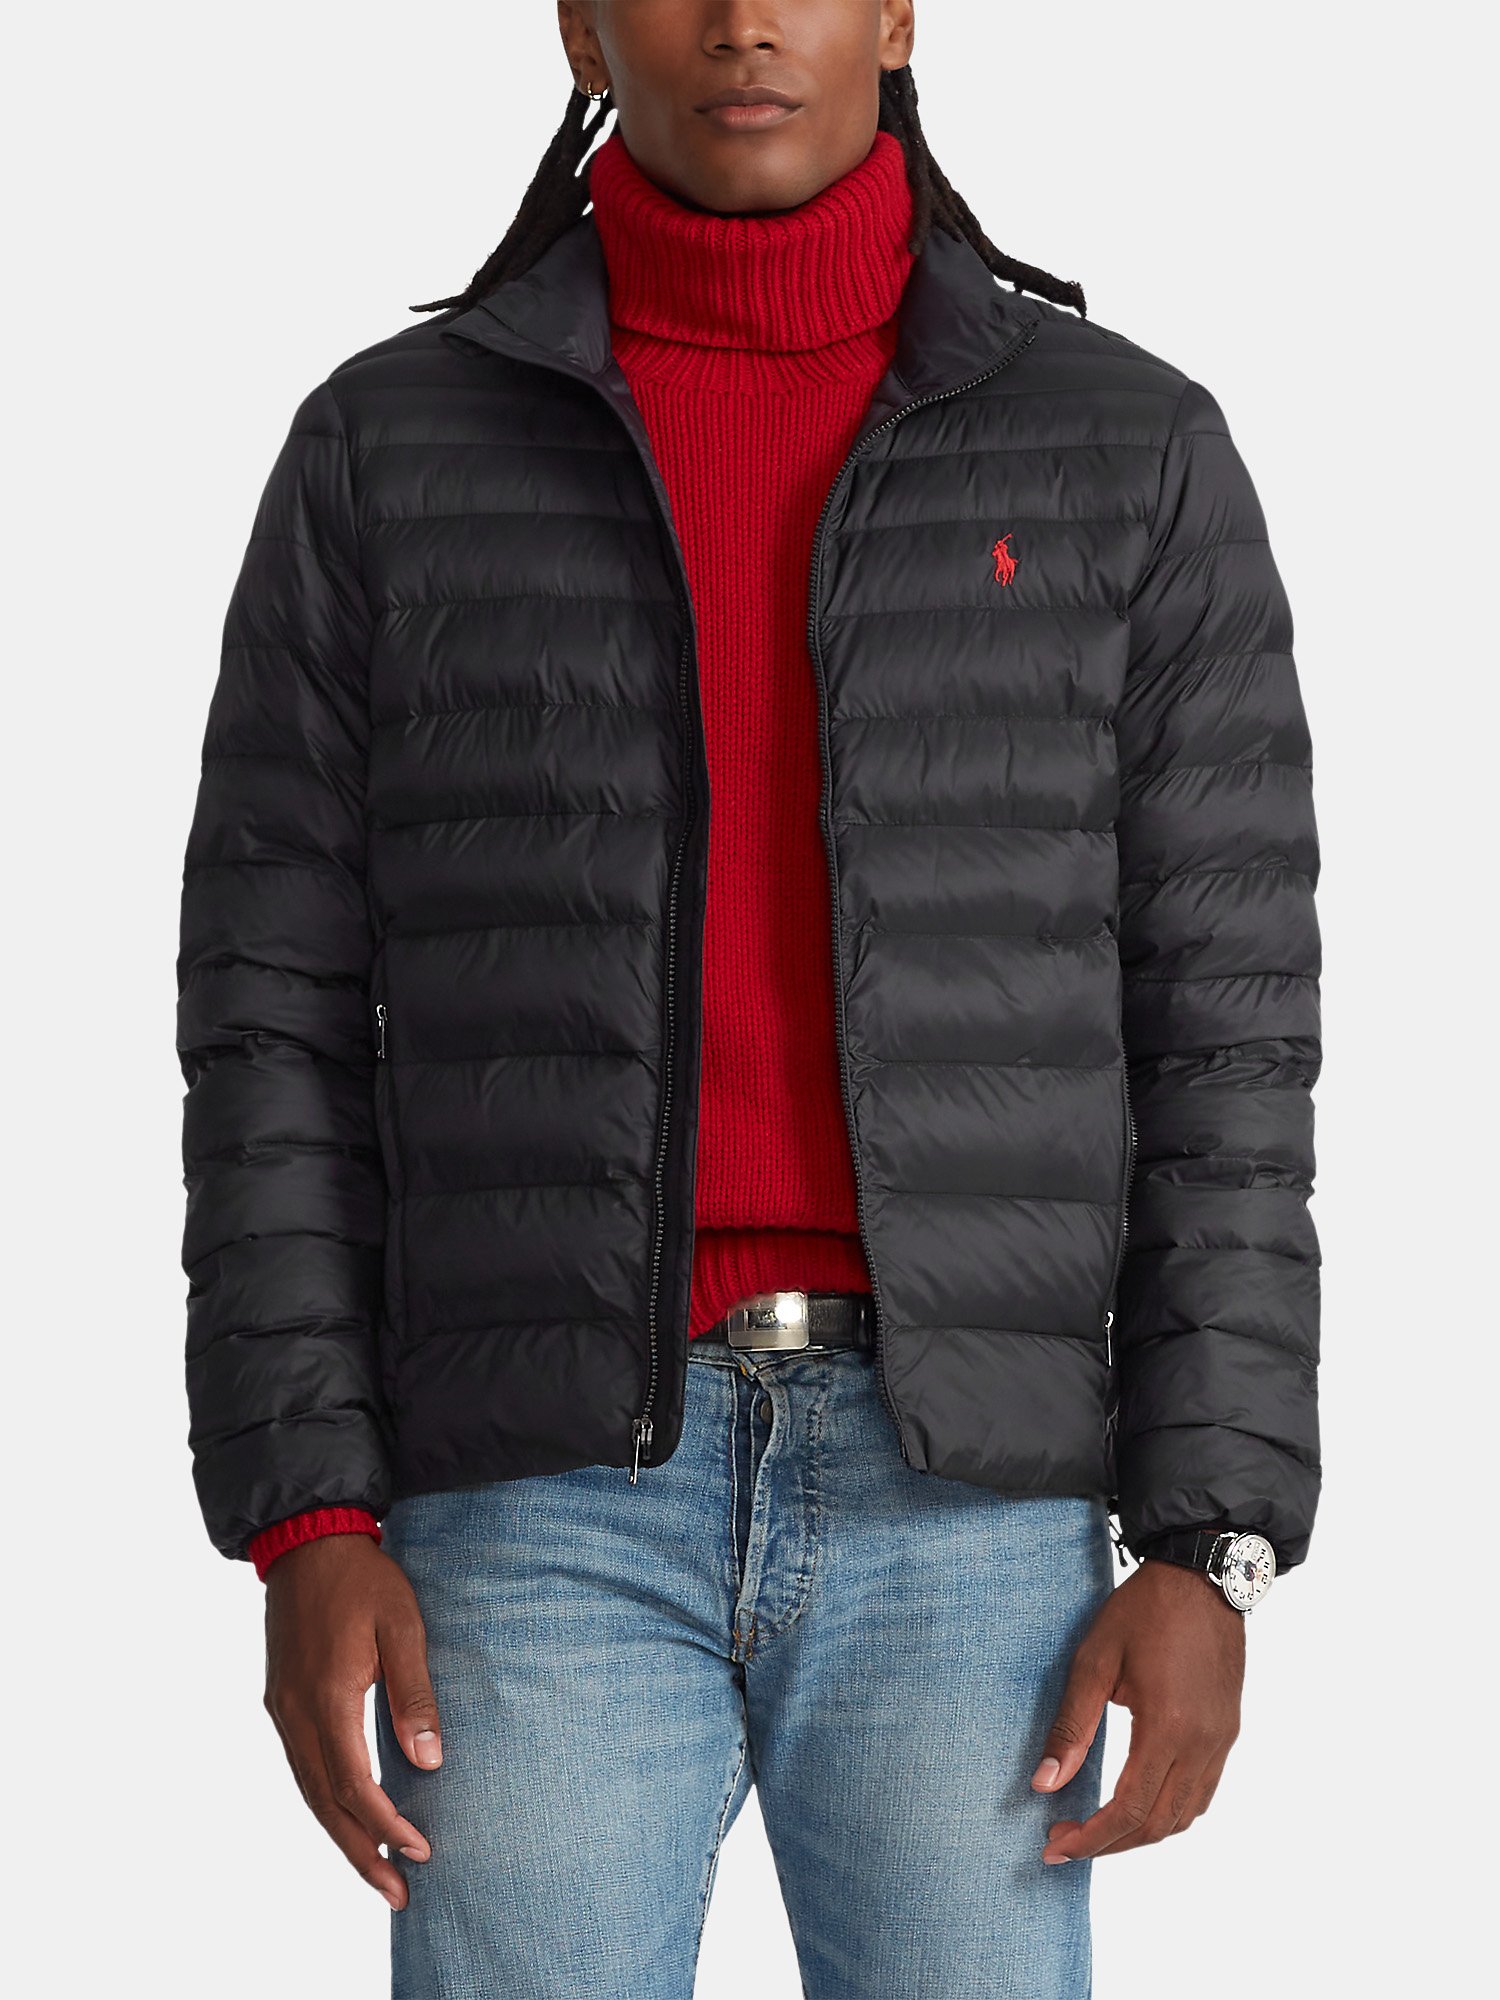 polo packable jacket